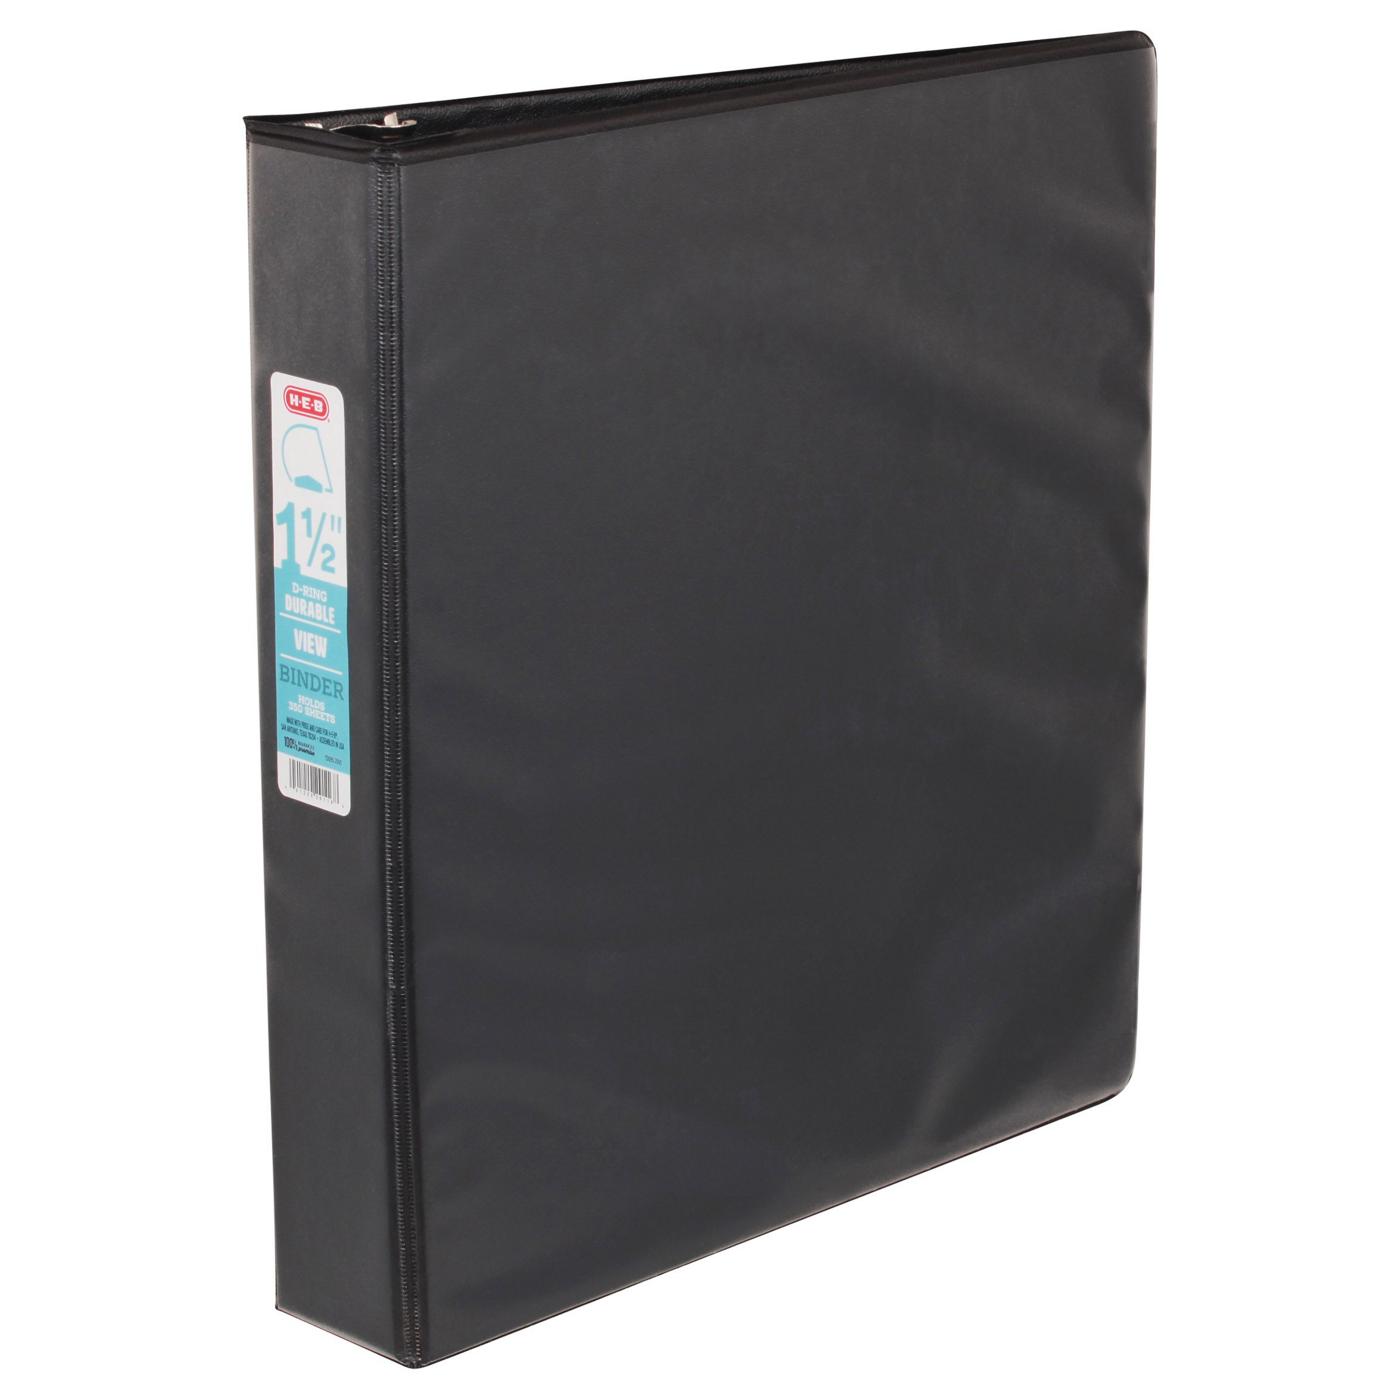 H-E-B D-Ring Durable View Binder - Black; image 1 of 2